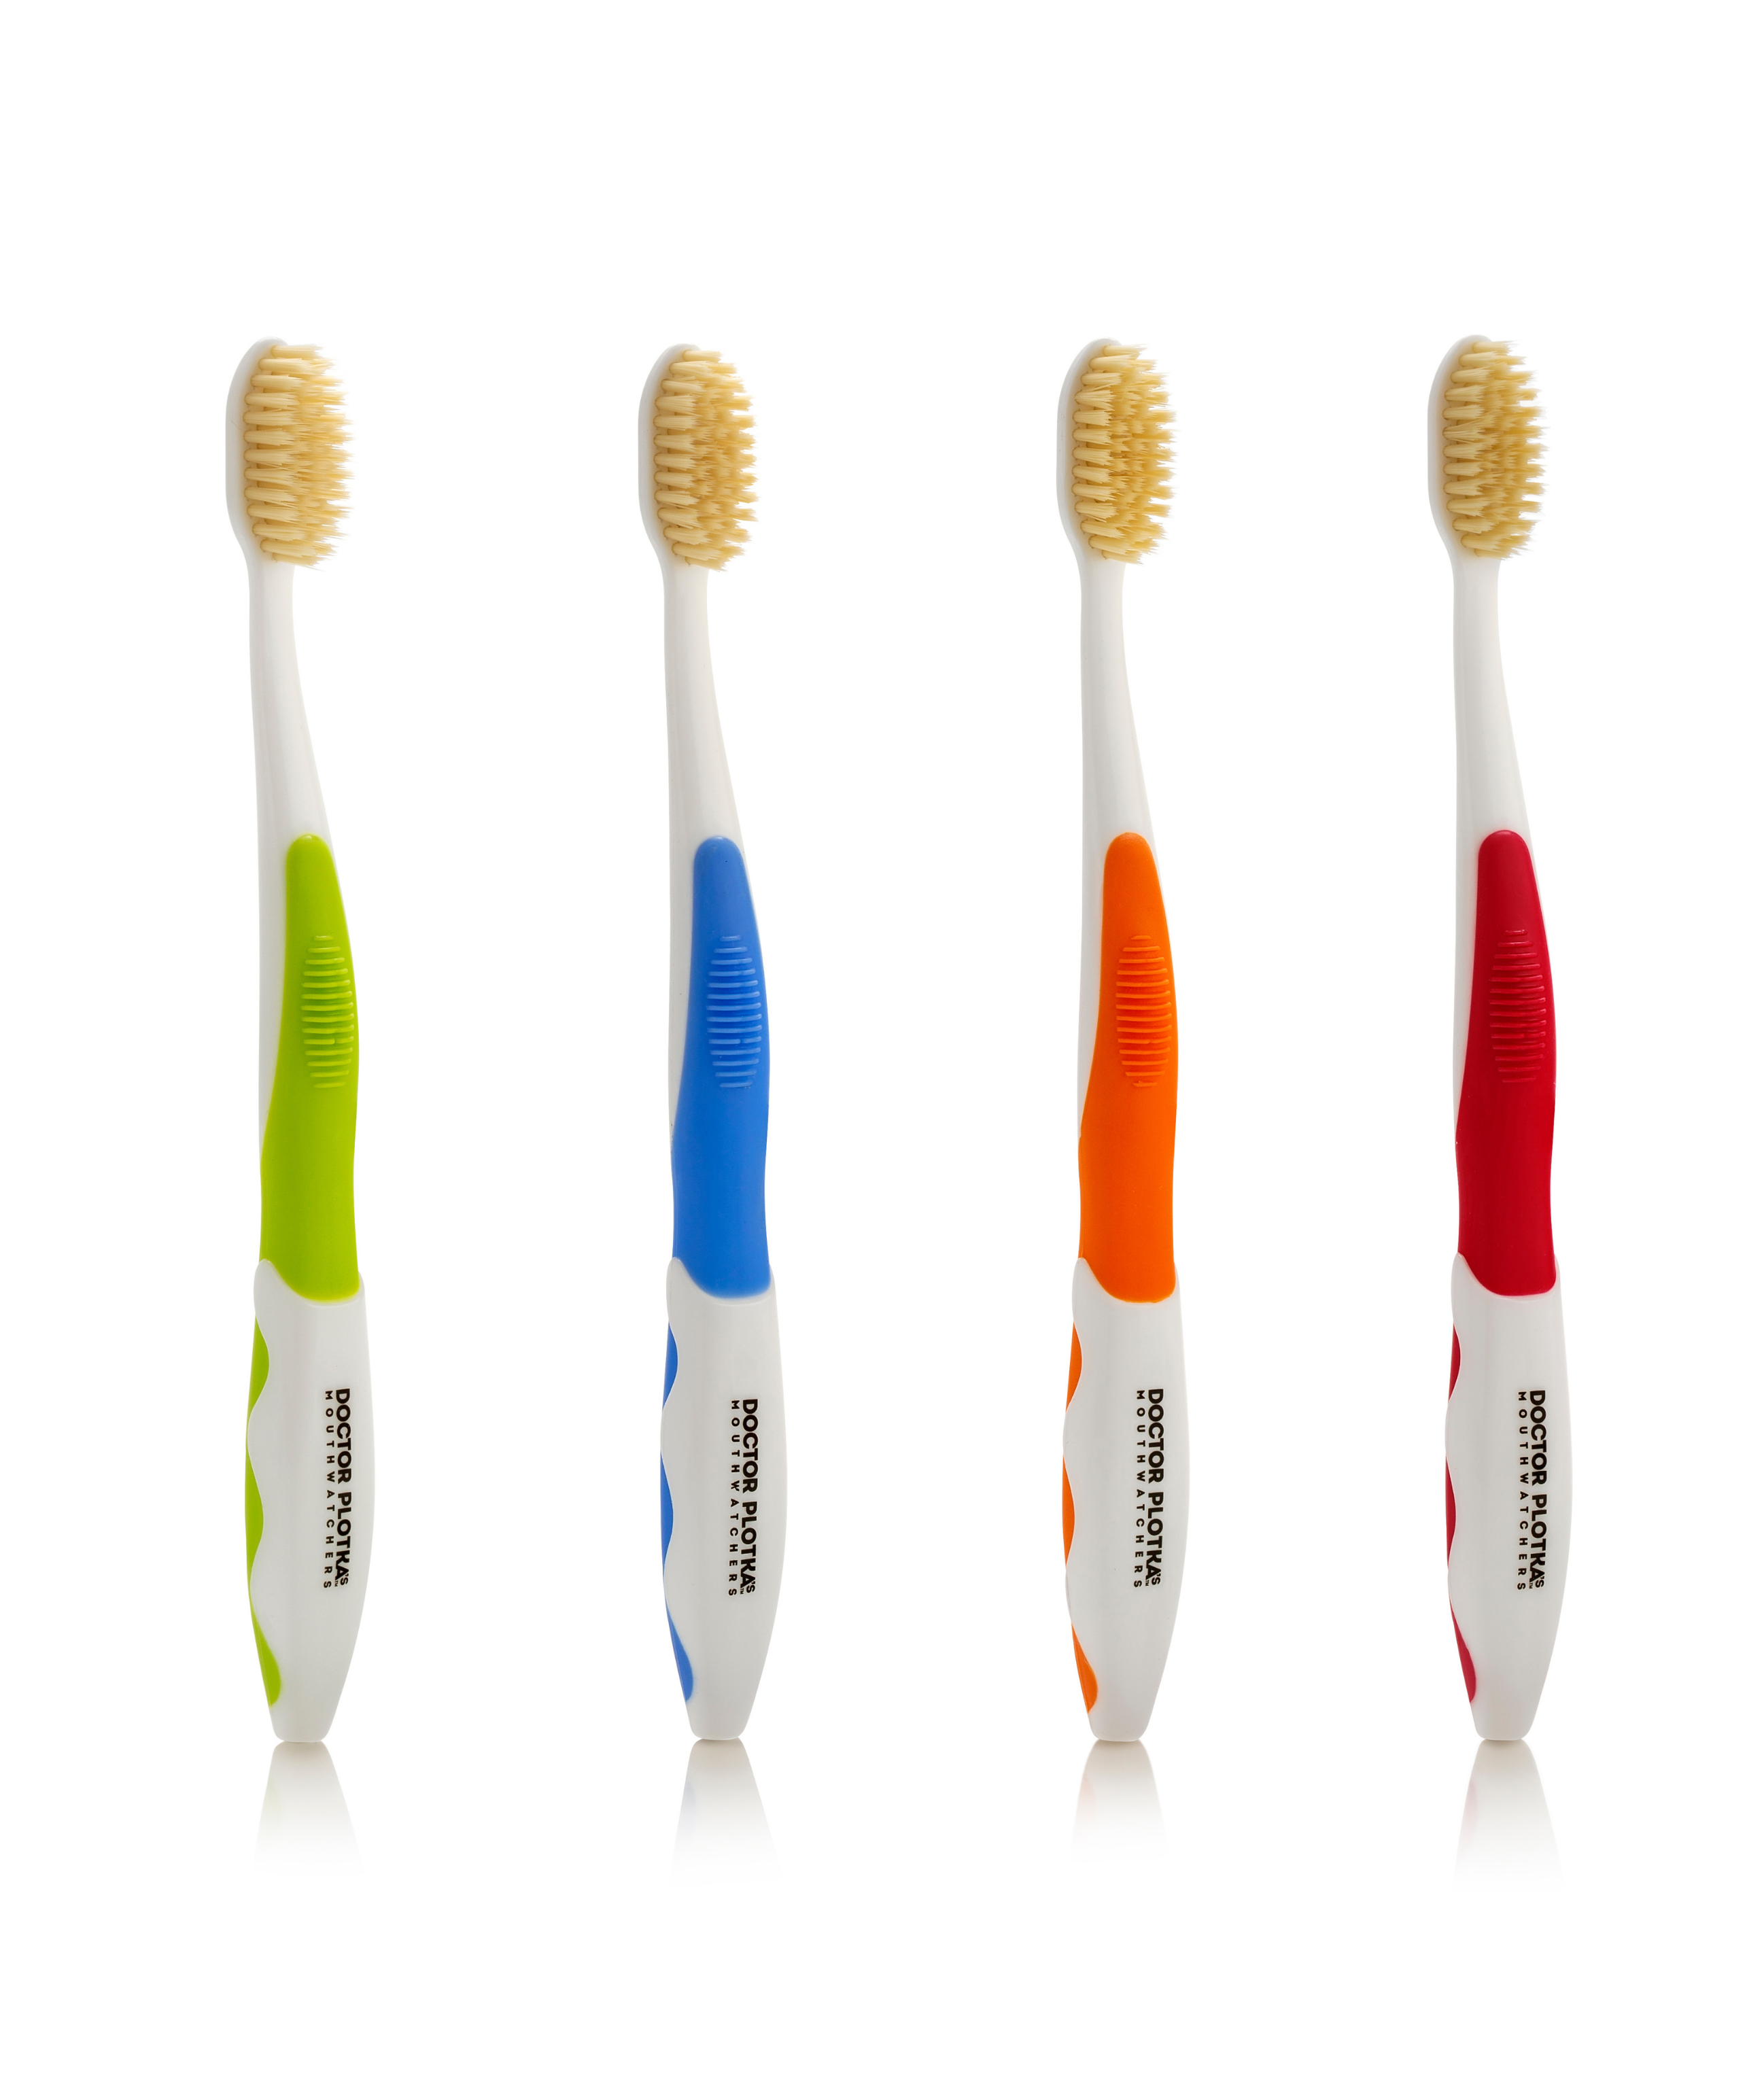 Mouth Watchers Ns-704 Antimicrobial Silver Adult Toothbrush